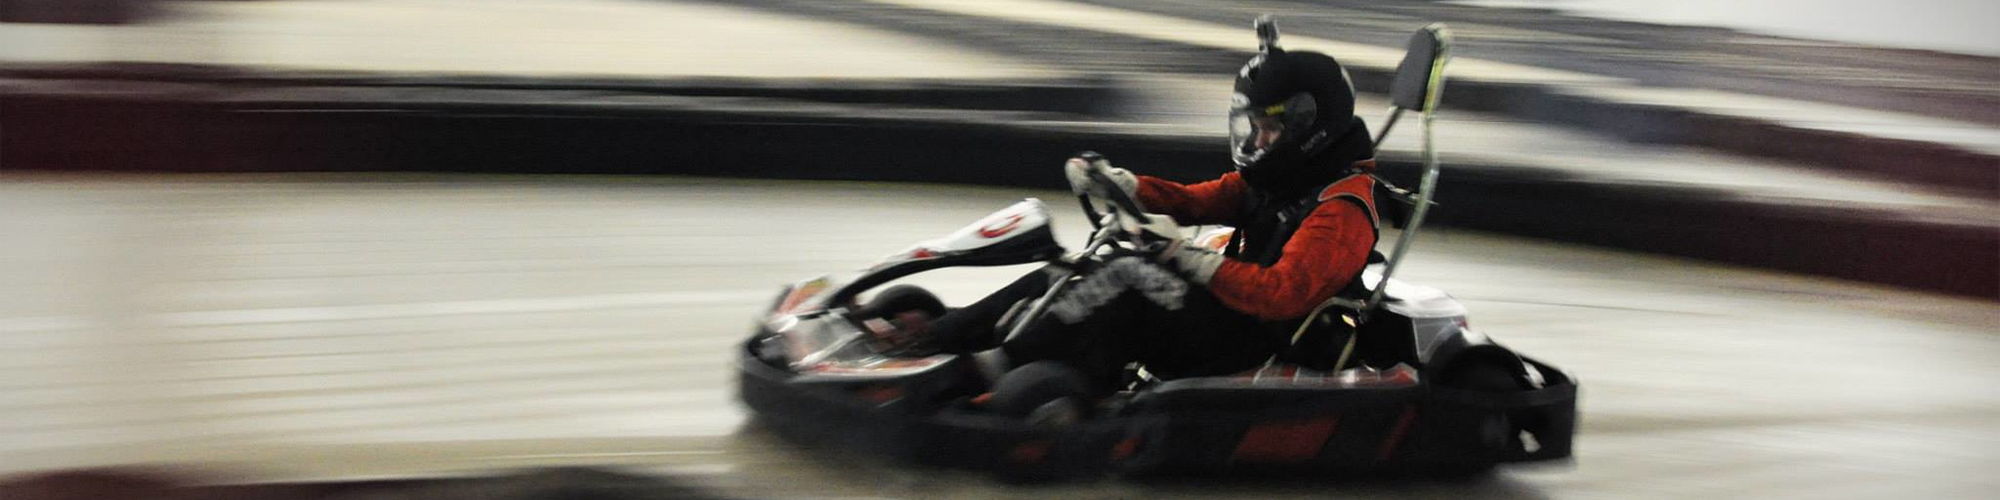 The Pit Indoor Kart Racing cover image